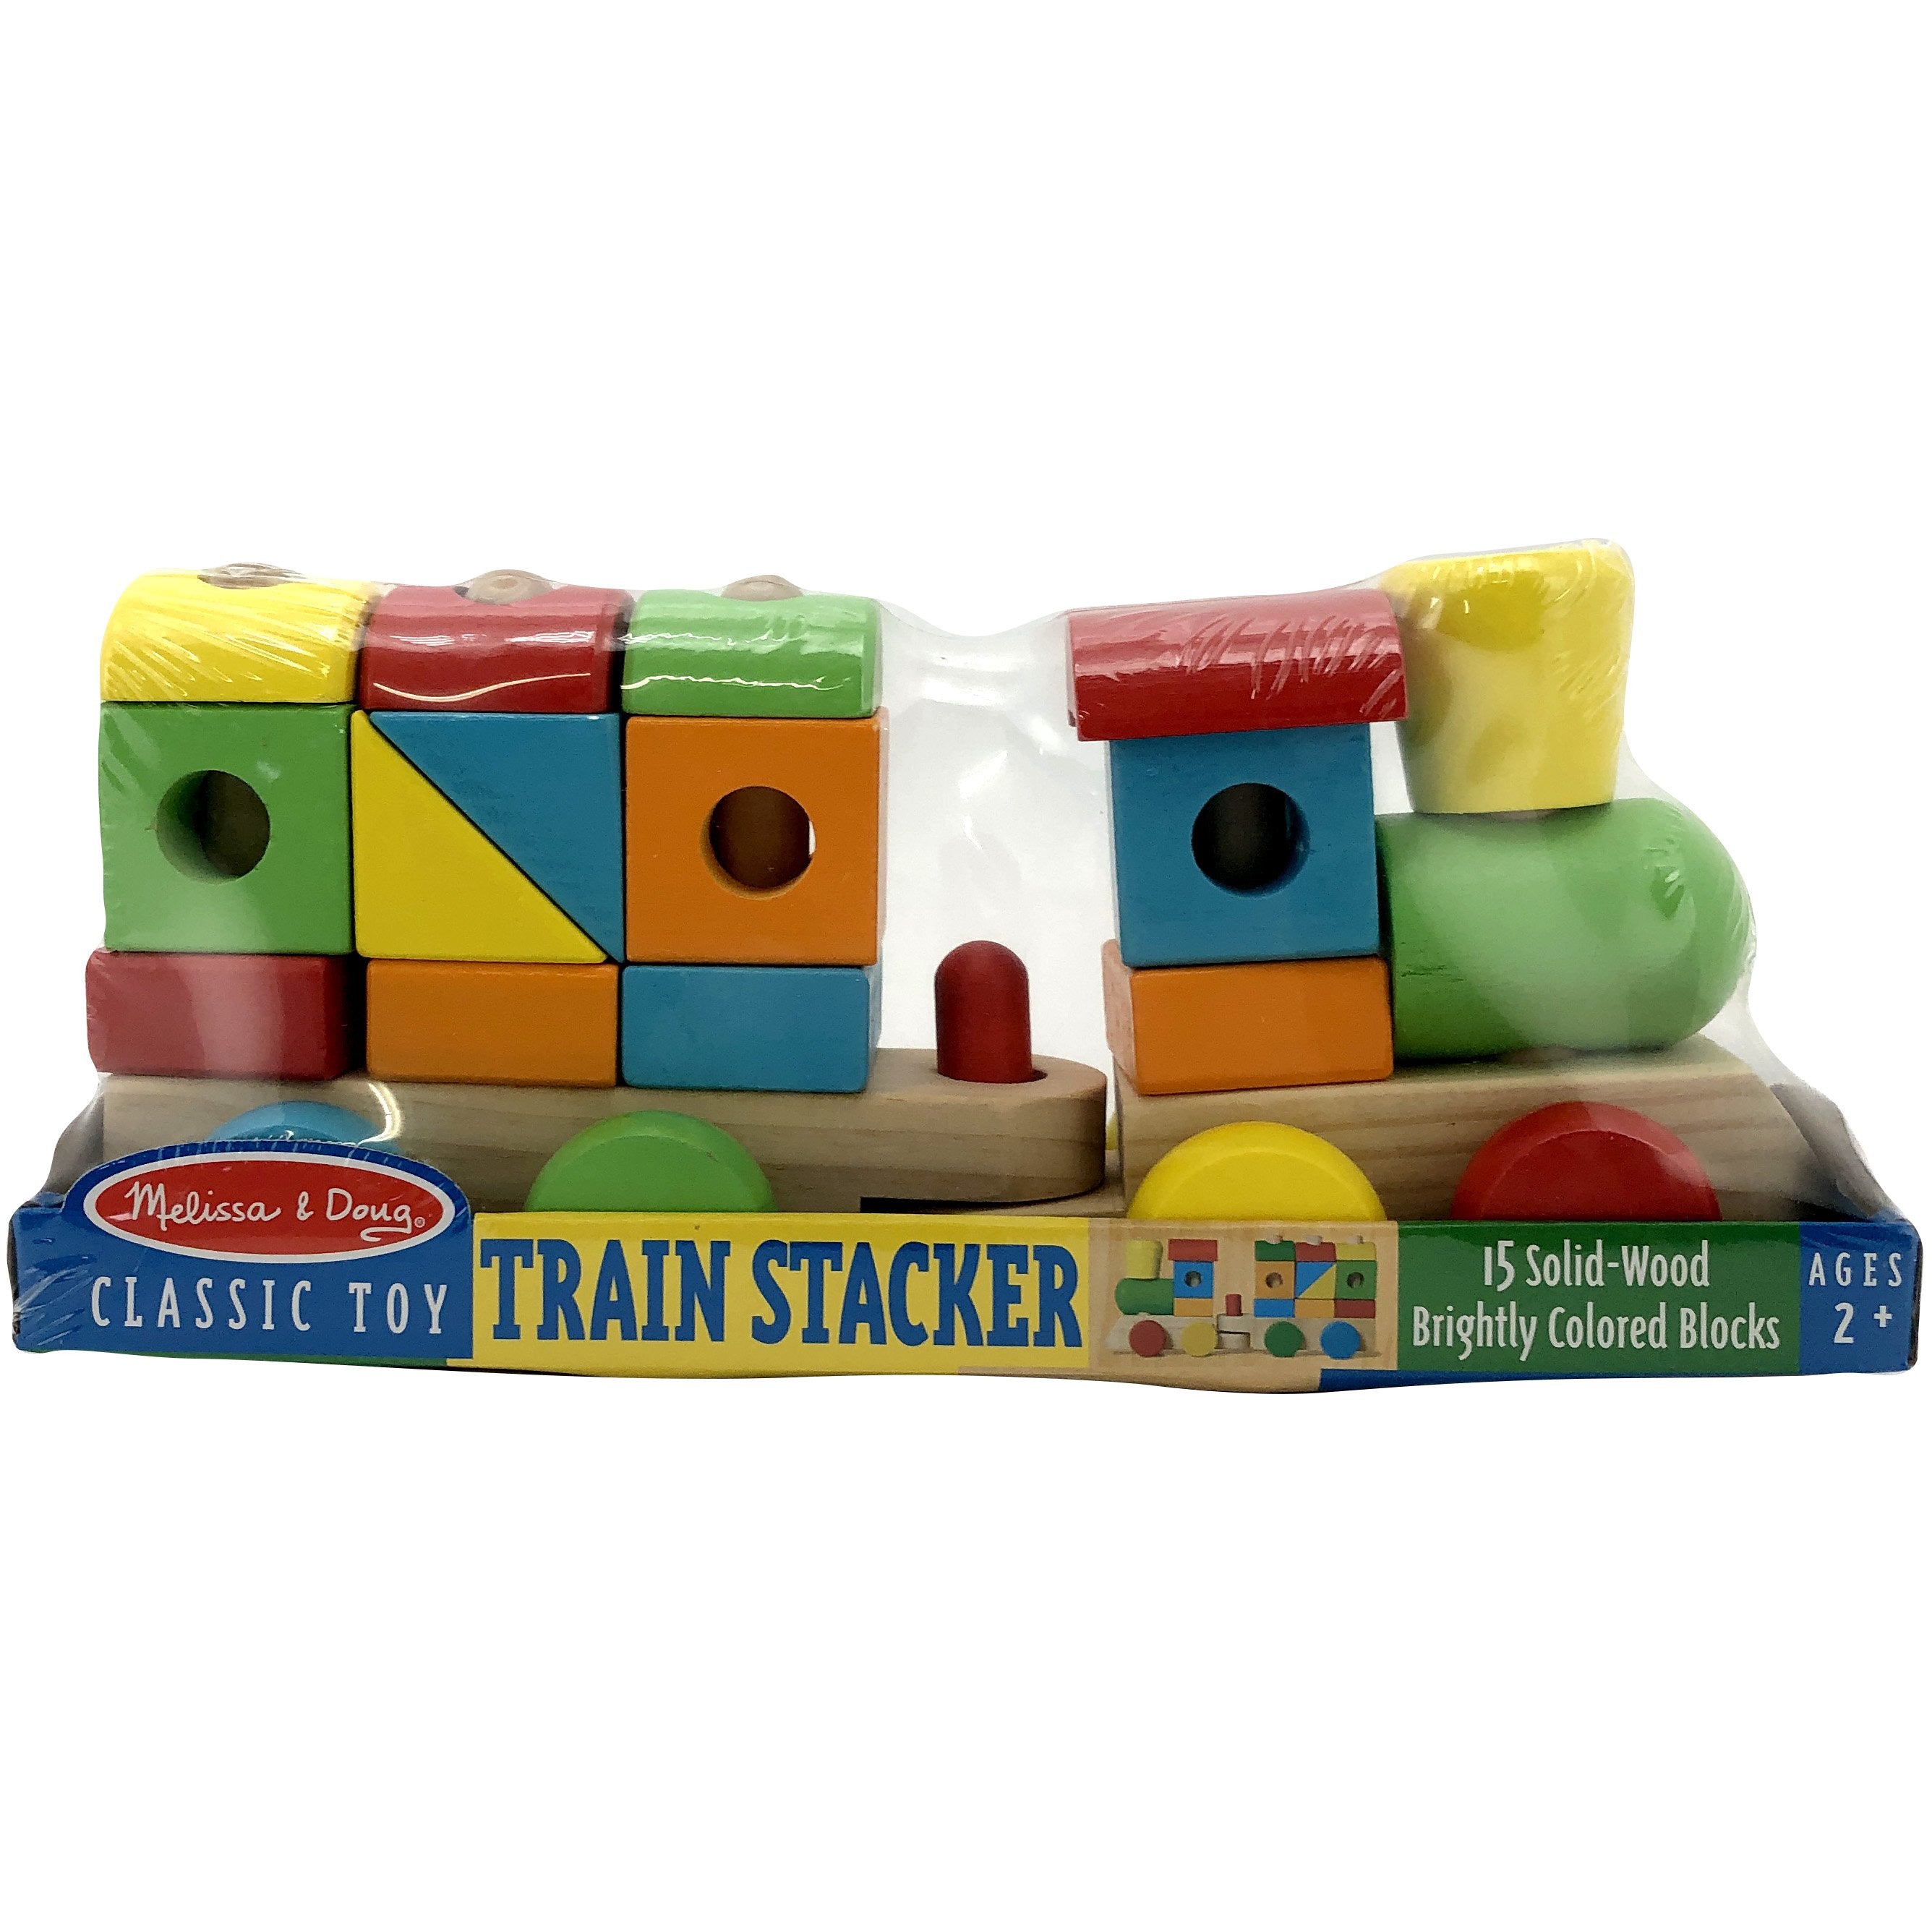 Melissa & Doug Toy wooden train with caboose and 15 brightly colored stacking blocks